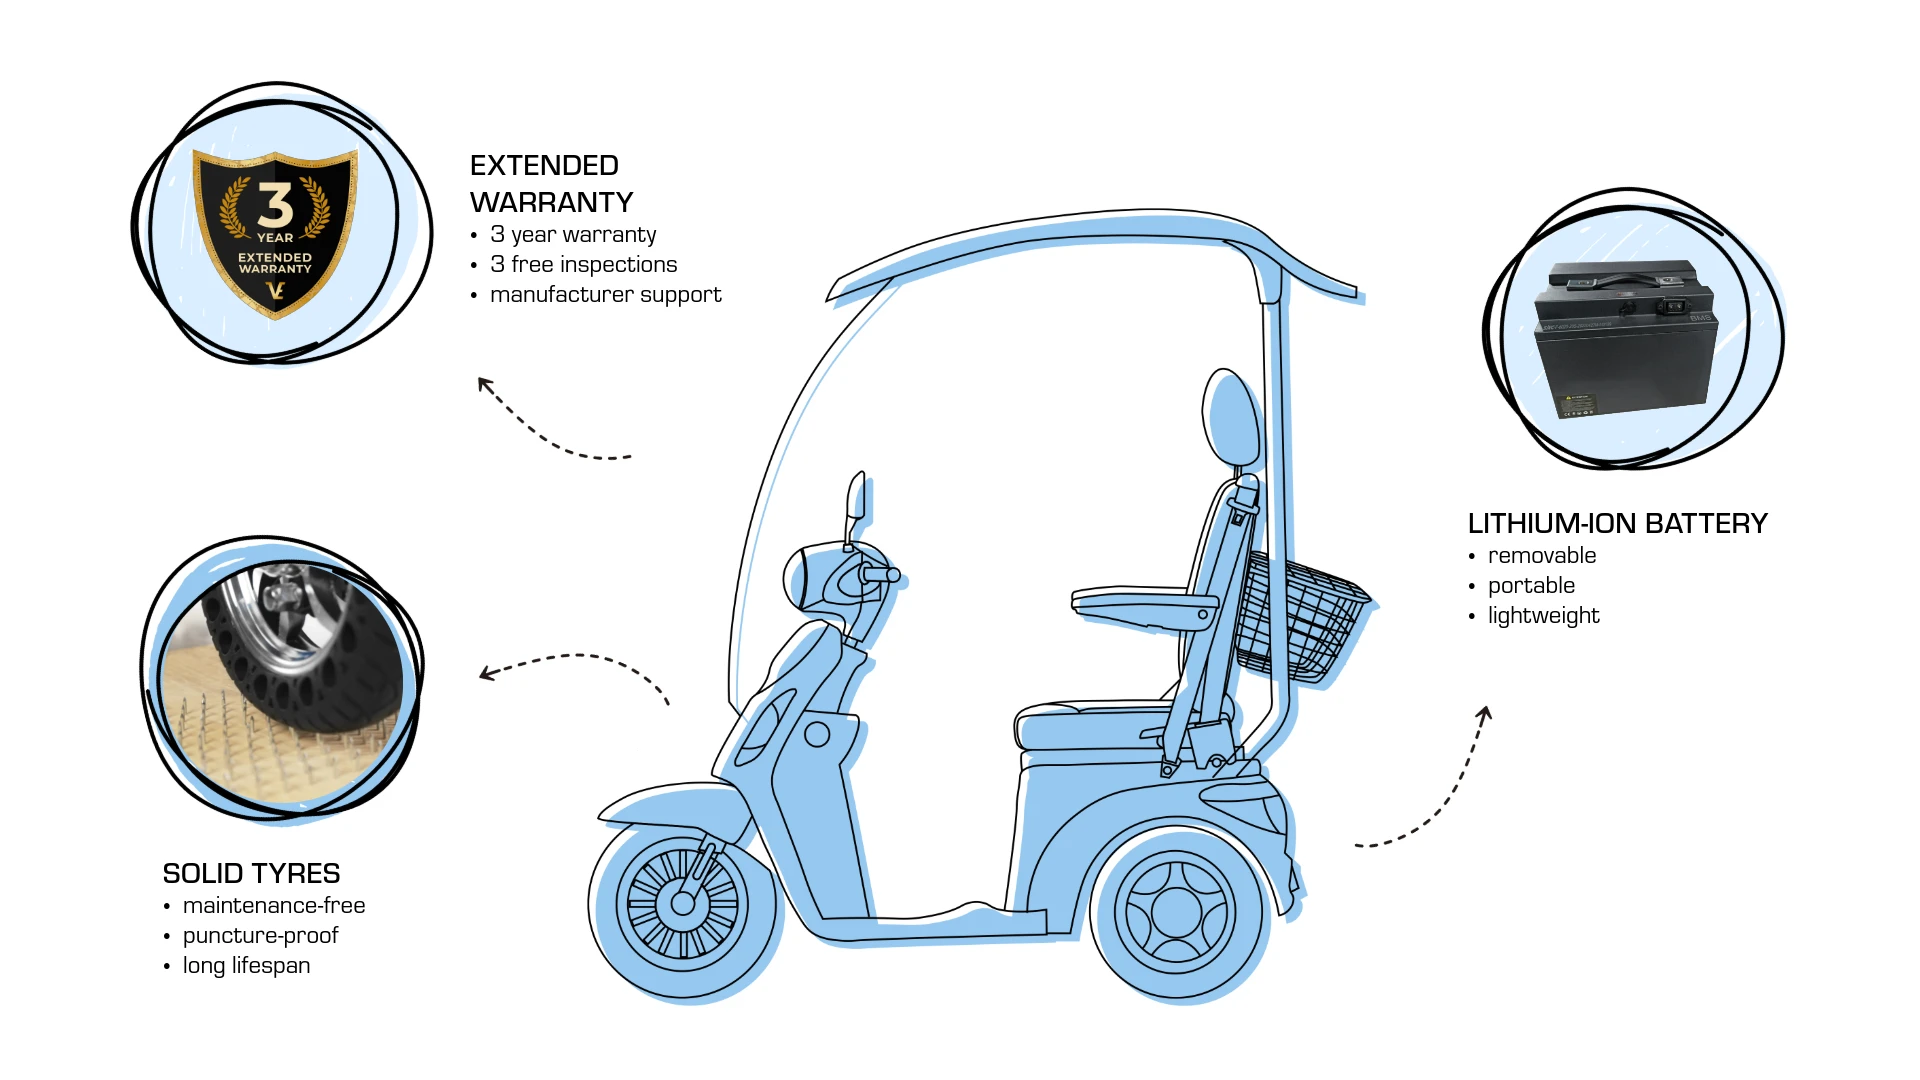 Veleco DRACO with canopy and captain seat extras, upgrades, solid tyres for mobility scooter, extended warranty, lithium-ion battery